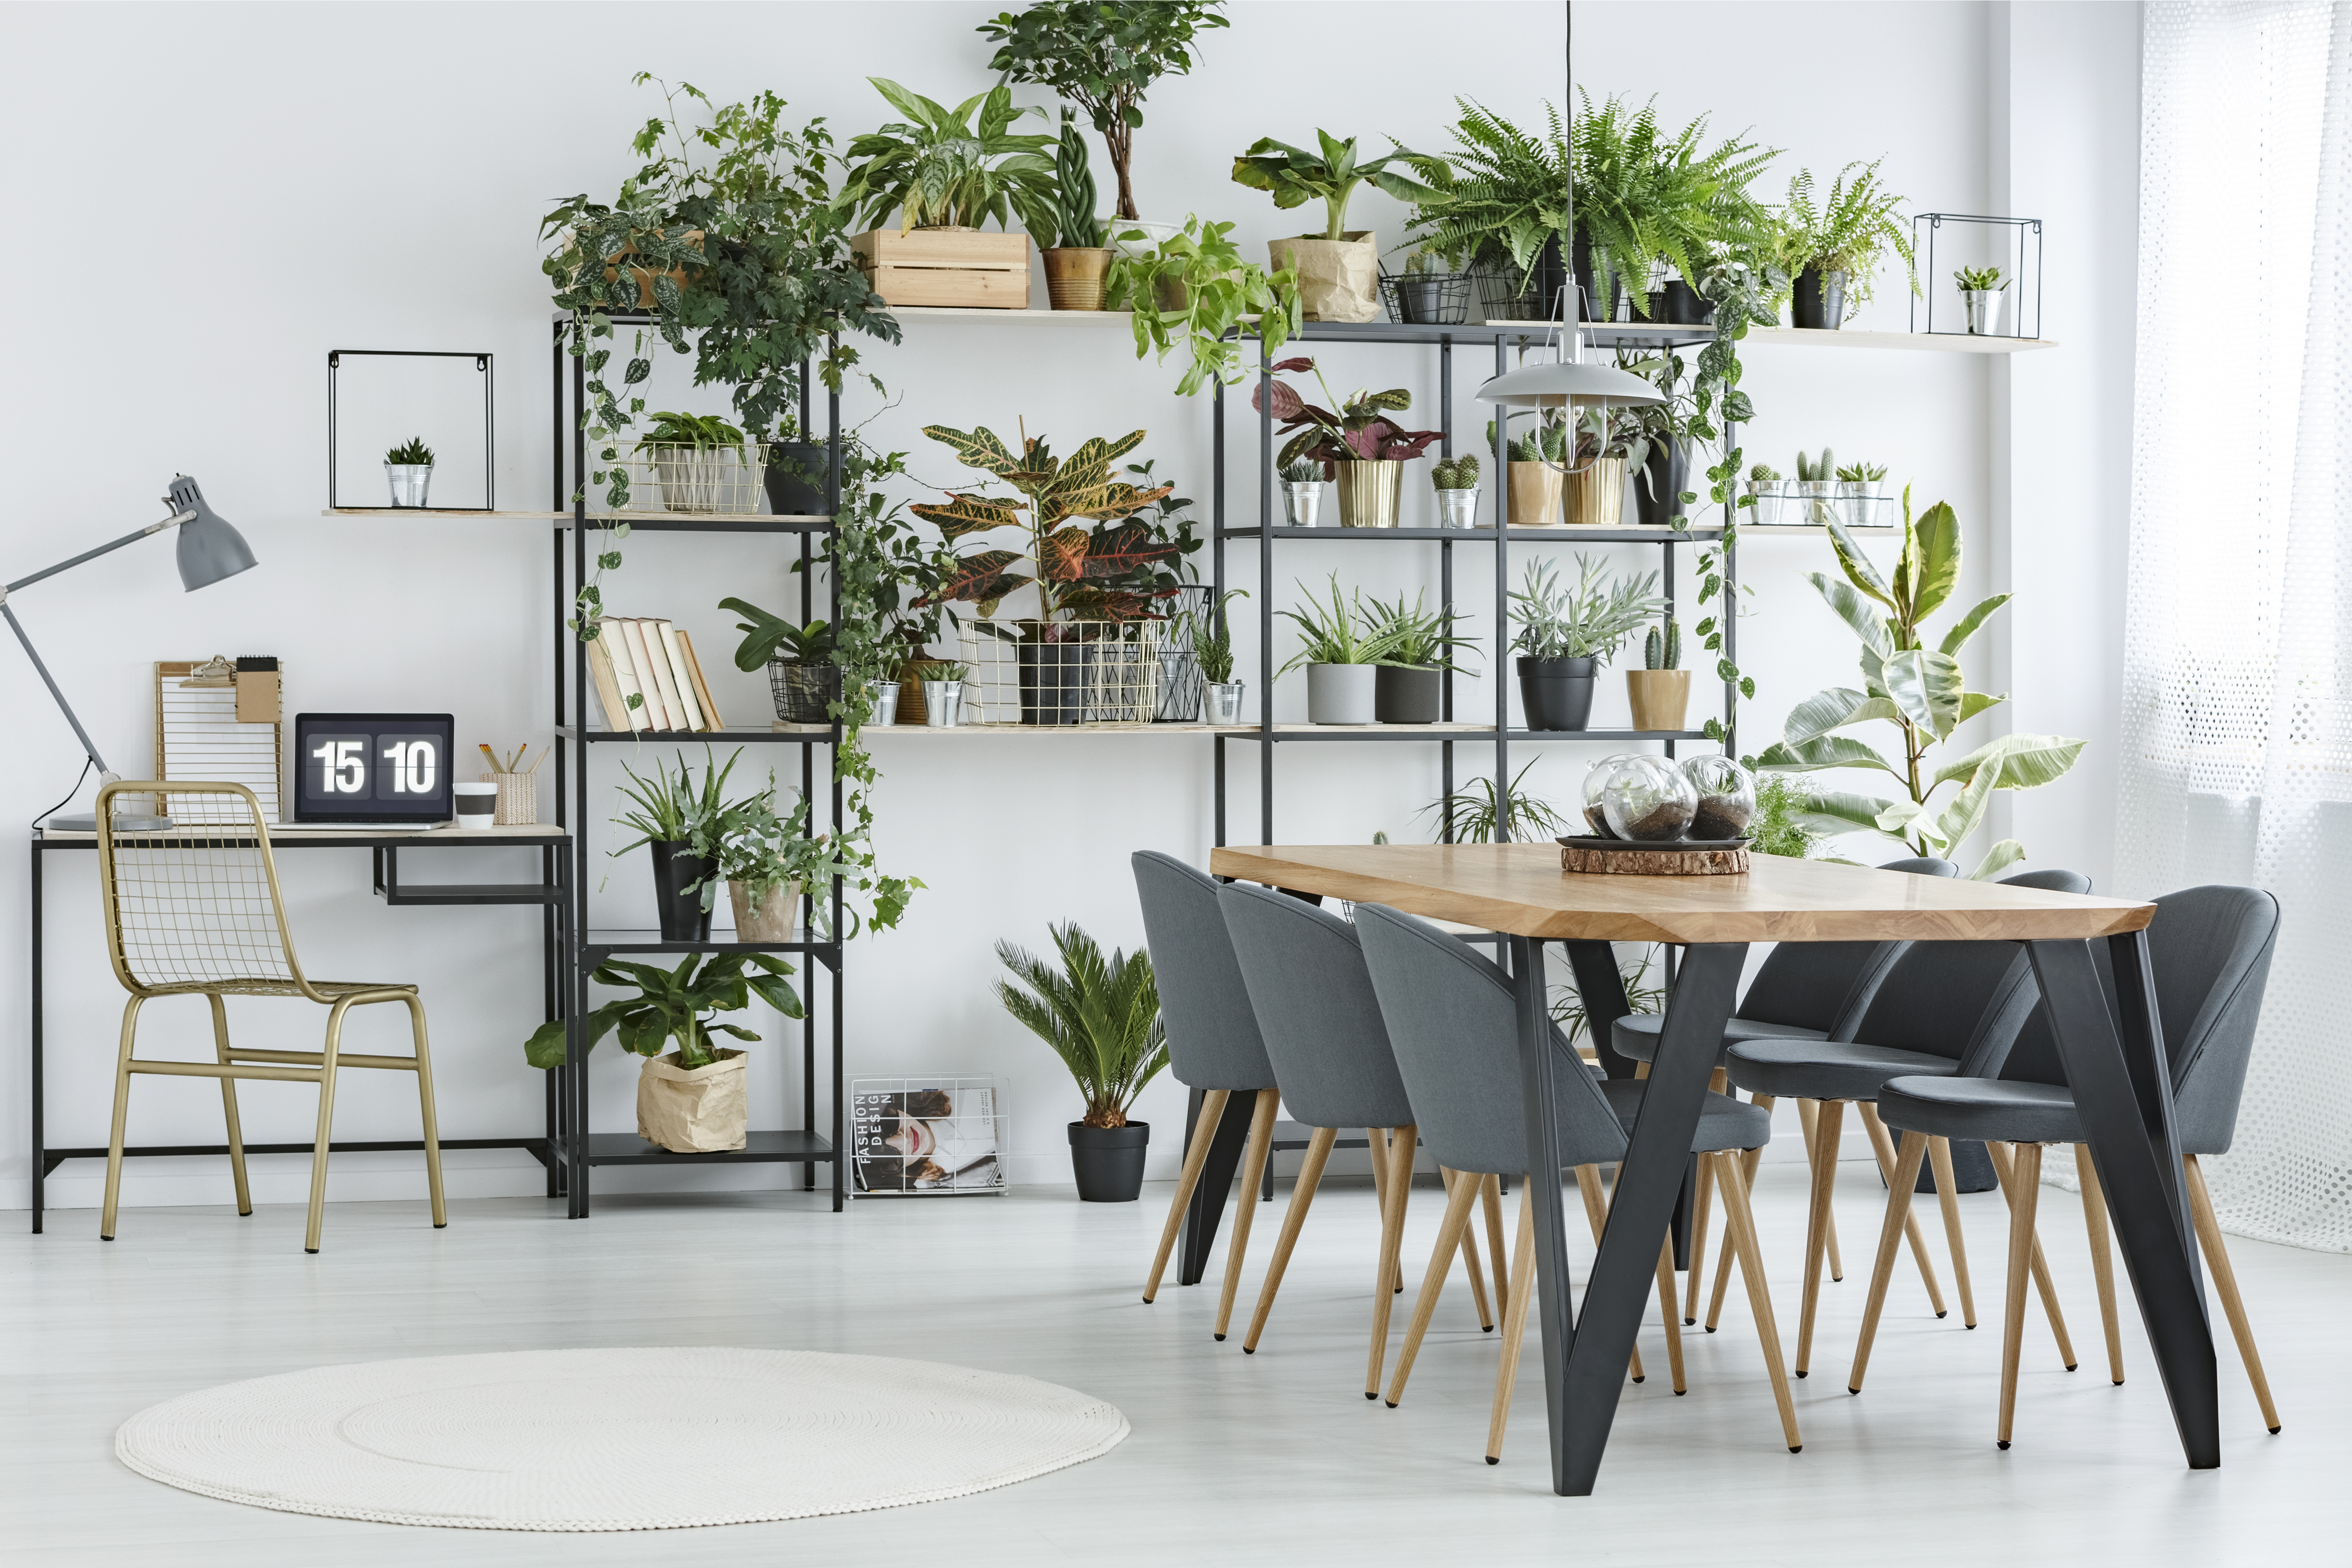 White round rug and plants in apartment interior with laptop on desk and grey chairs at dining table